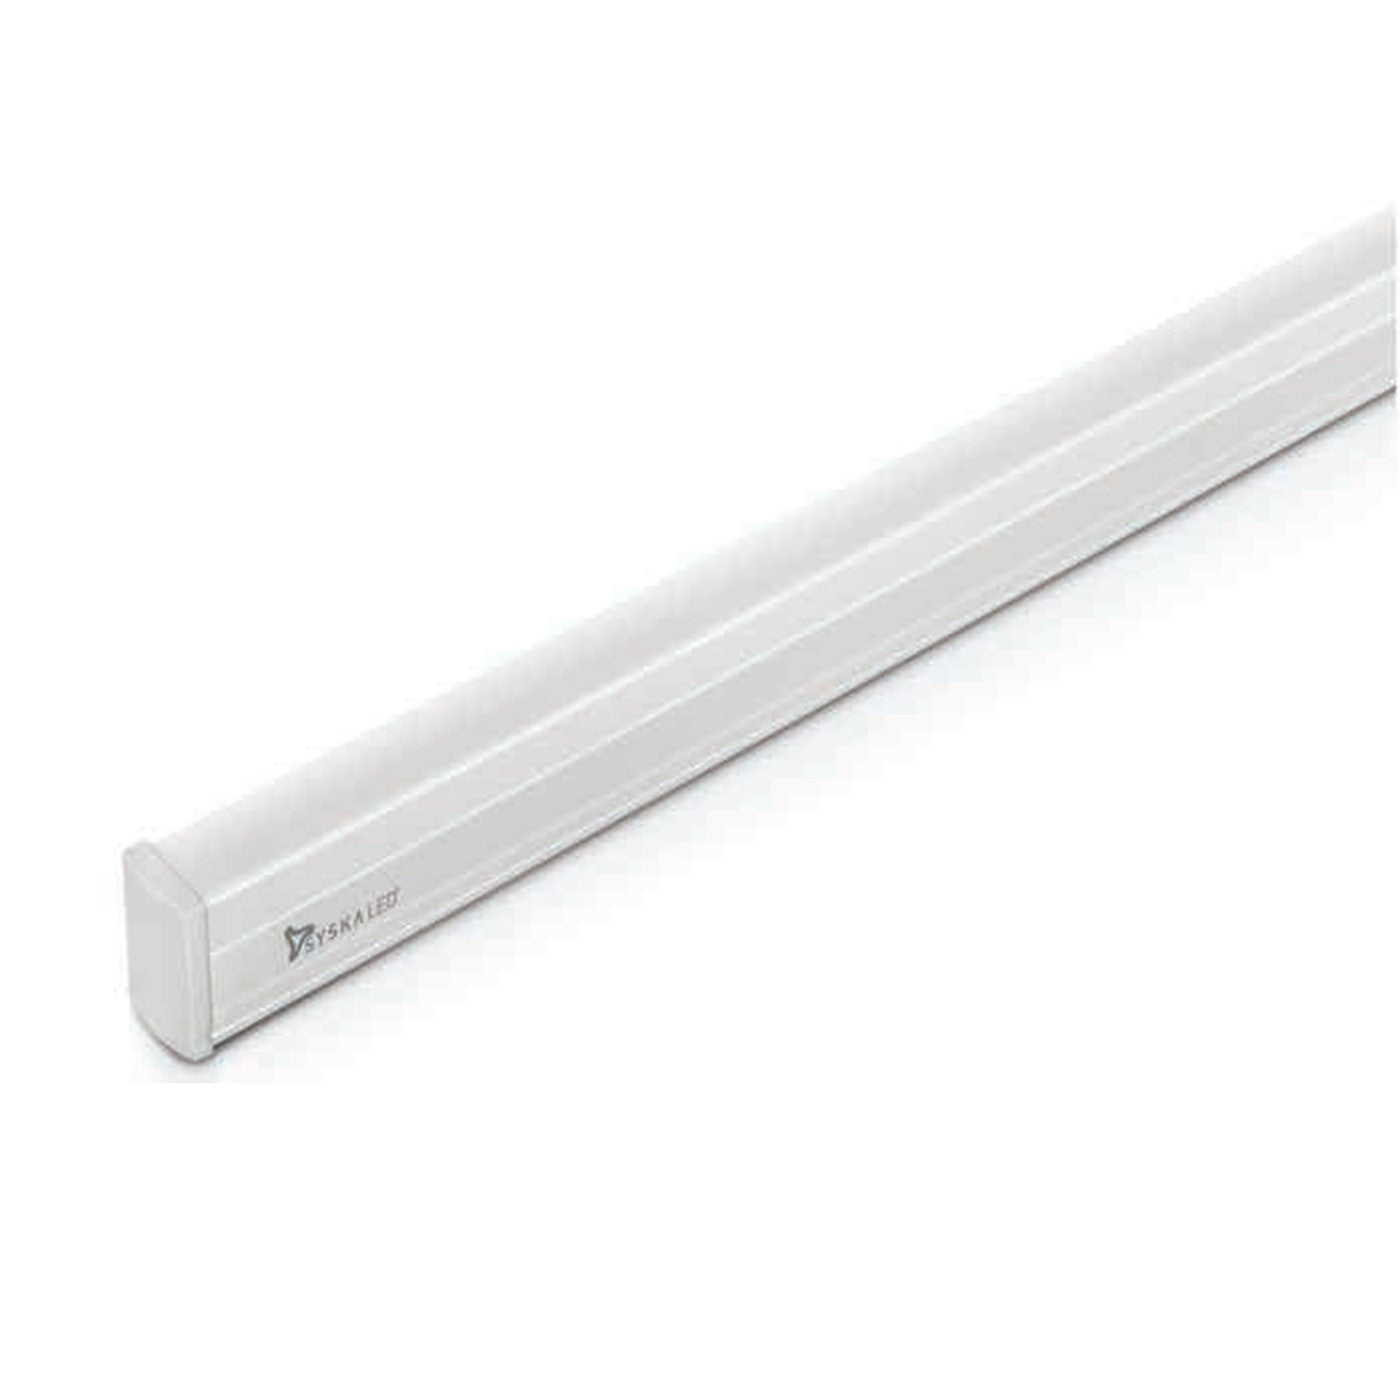 Buy SYSKA T5 LED Tube Light - White Online at Low Prices in India 